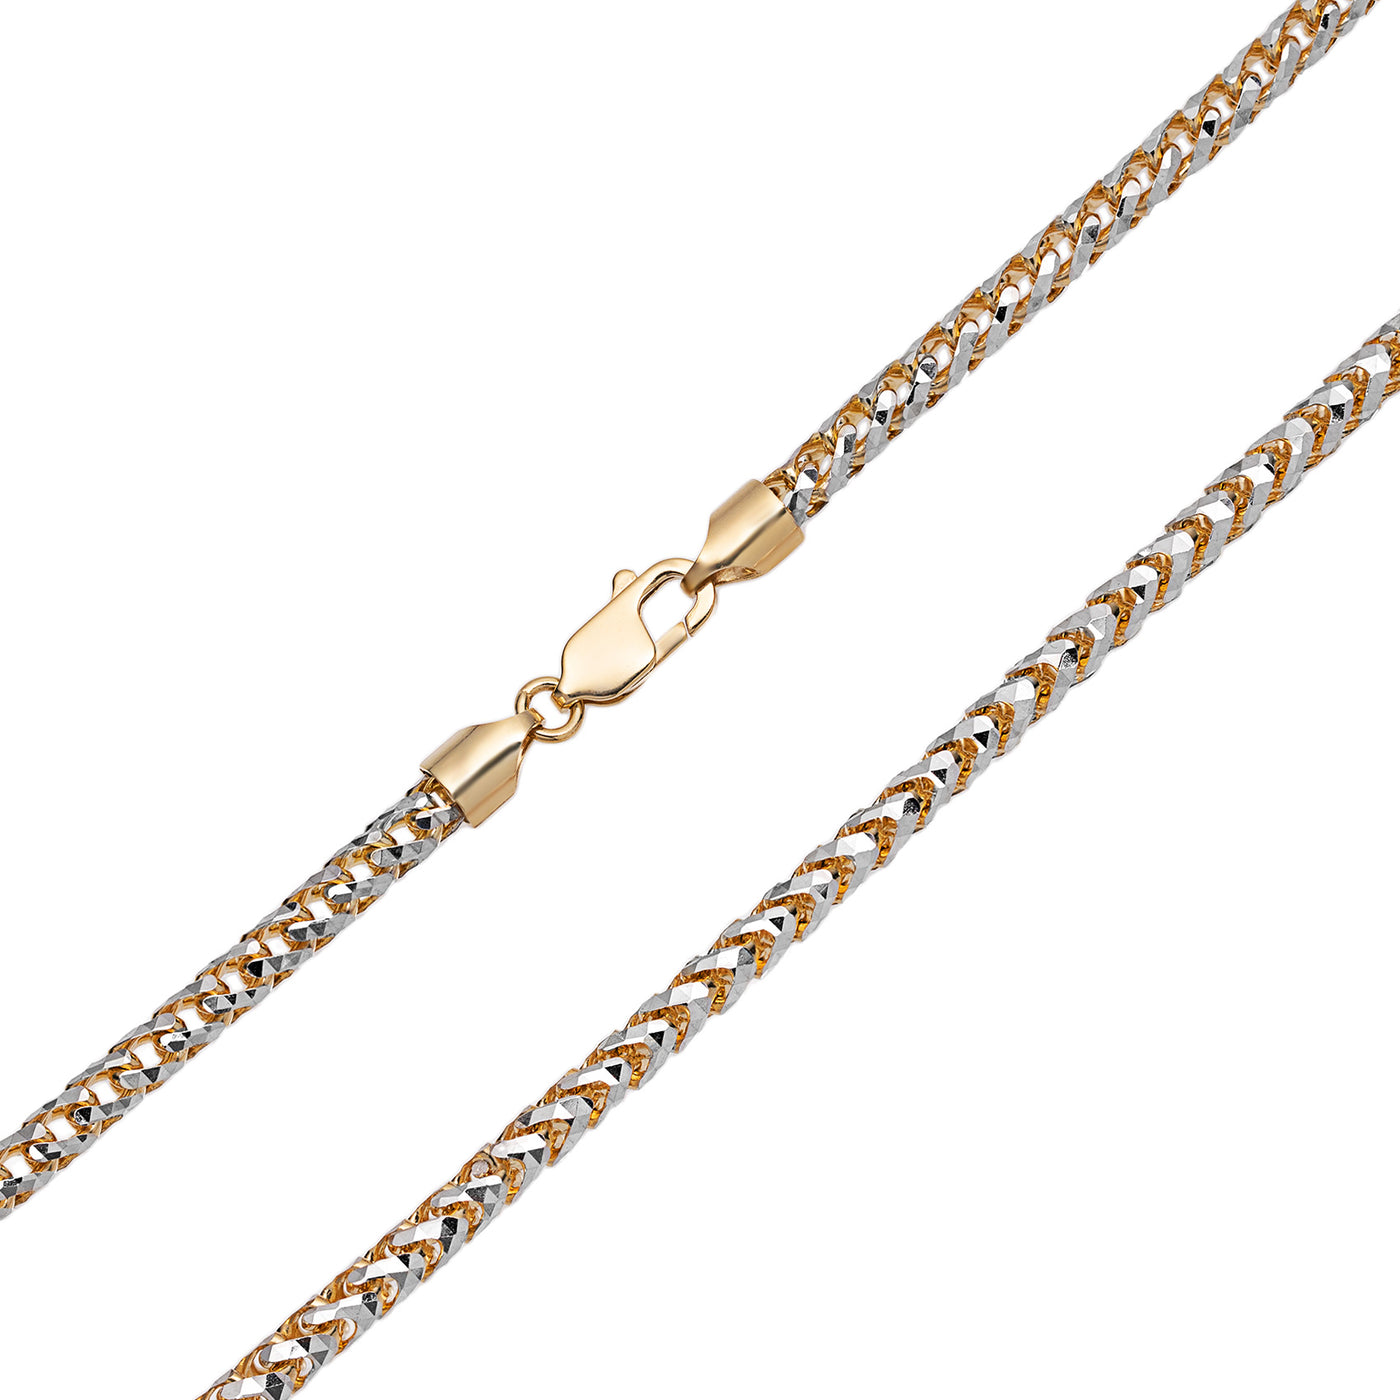 Women's Pave Round Franco Chain Necklace 14K Yellow White Gold